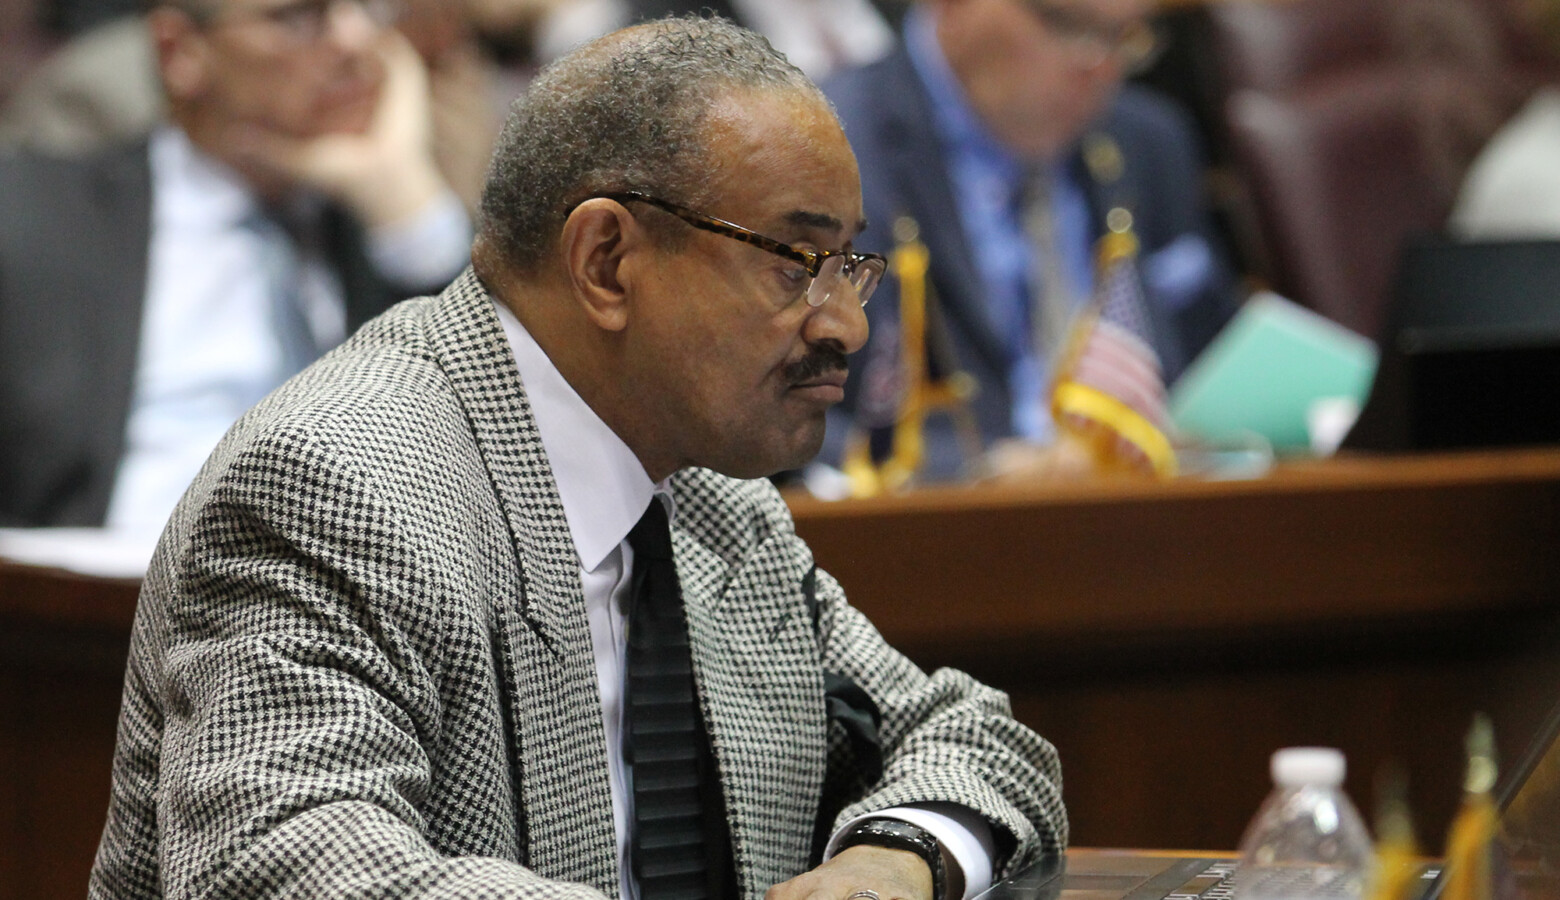 During debates on the legislation, Rep. Vernon Smith said Indiana already has multiple licensure pathways for teachers and that improving educators' pay is a necessary step to addressing the shortage. (Lauren Chapman/IPB News)